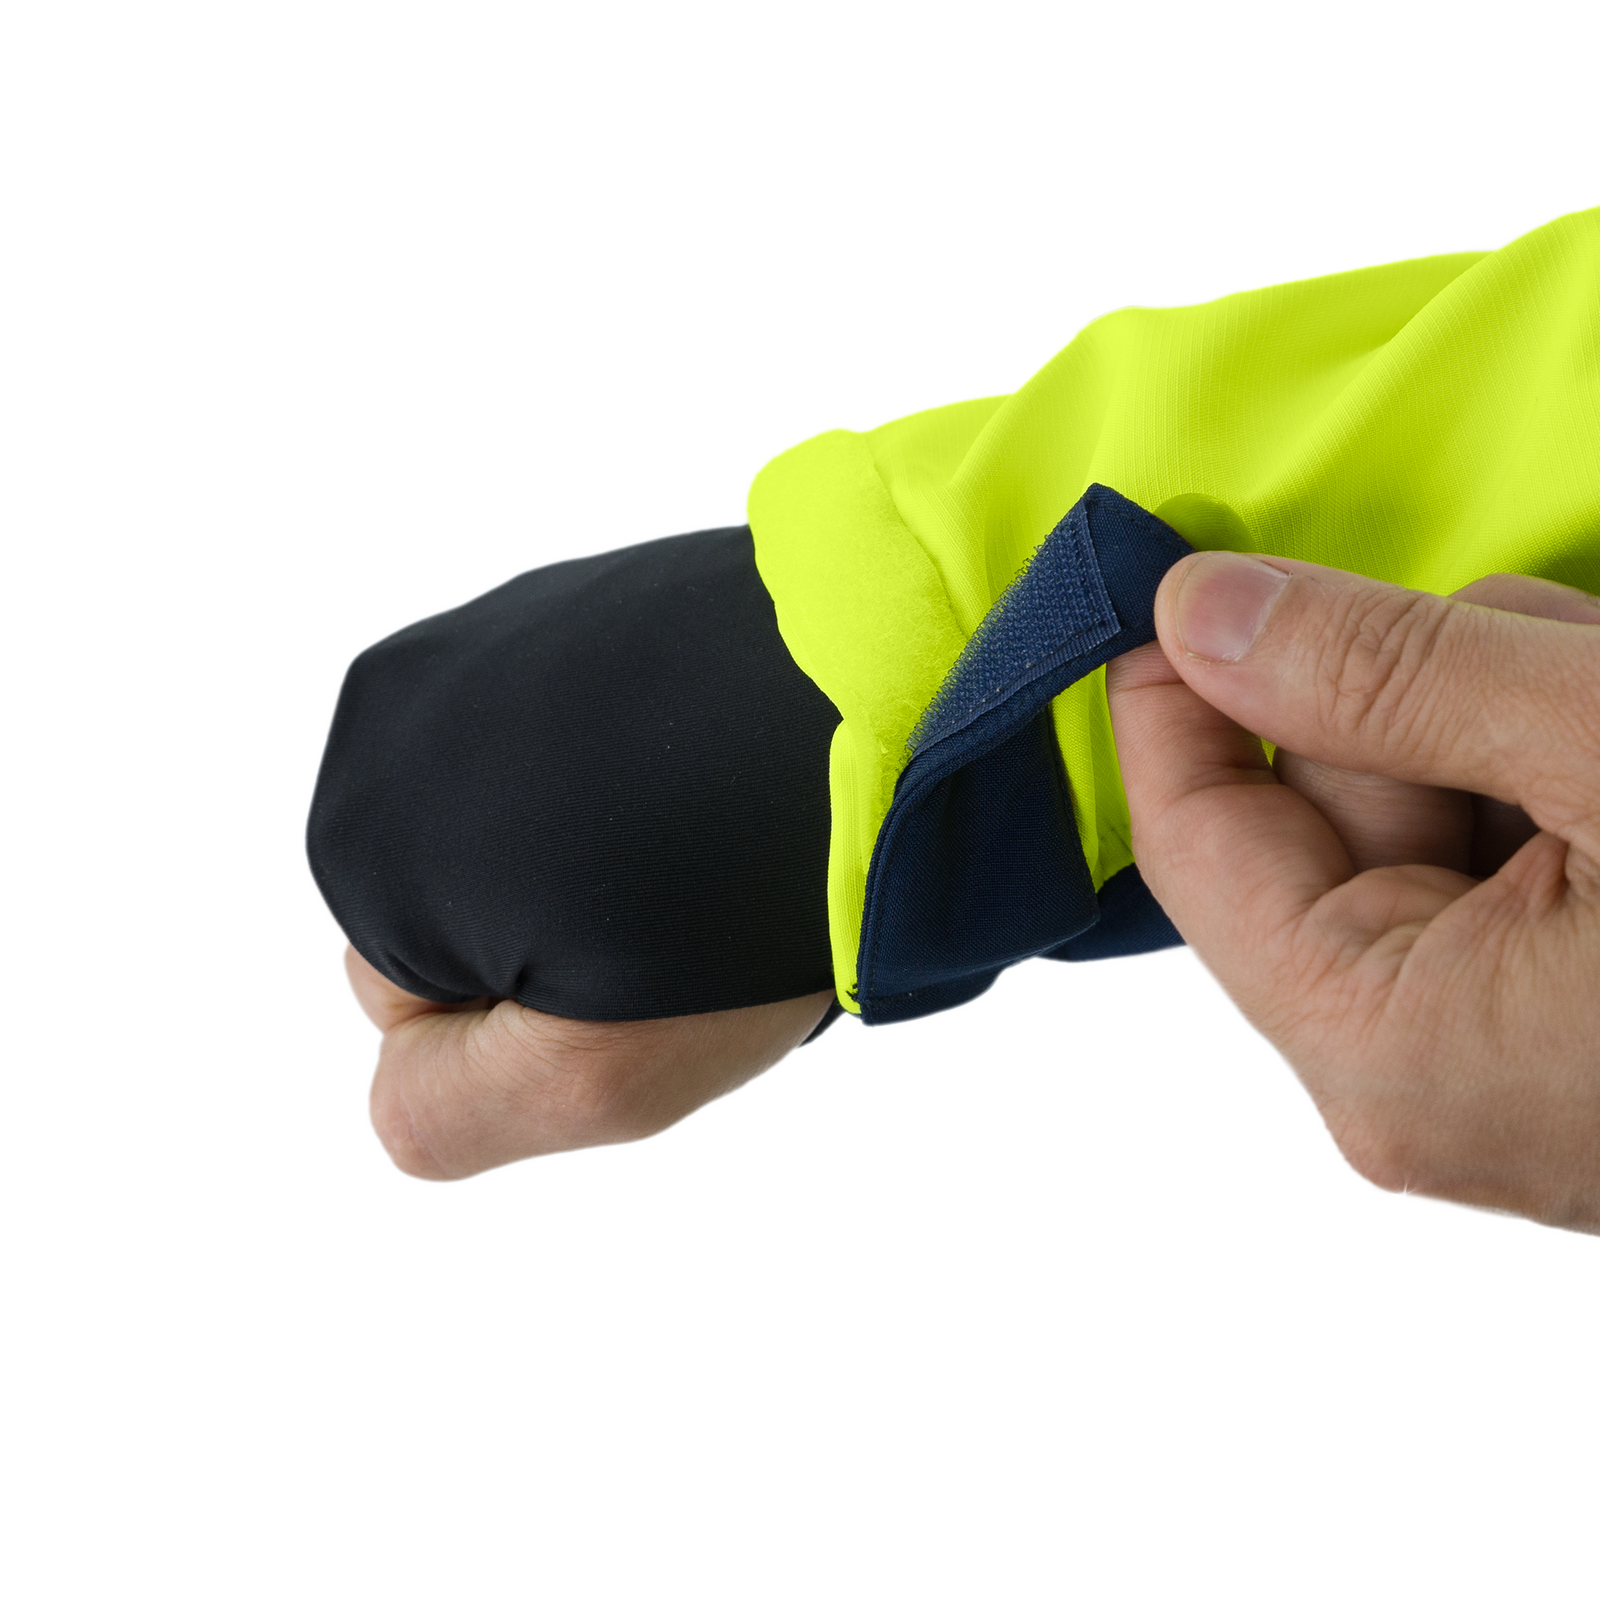 Adjustable Hook and look fastener on the Hi visibility soft shell safety jacket by JORESTECH